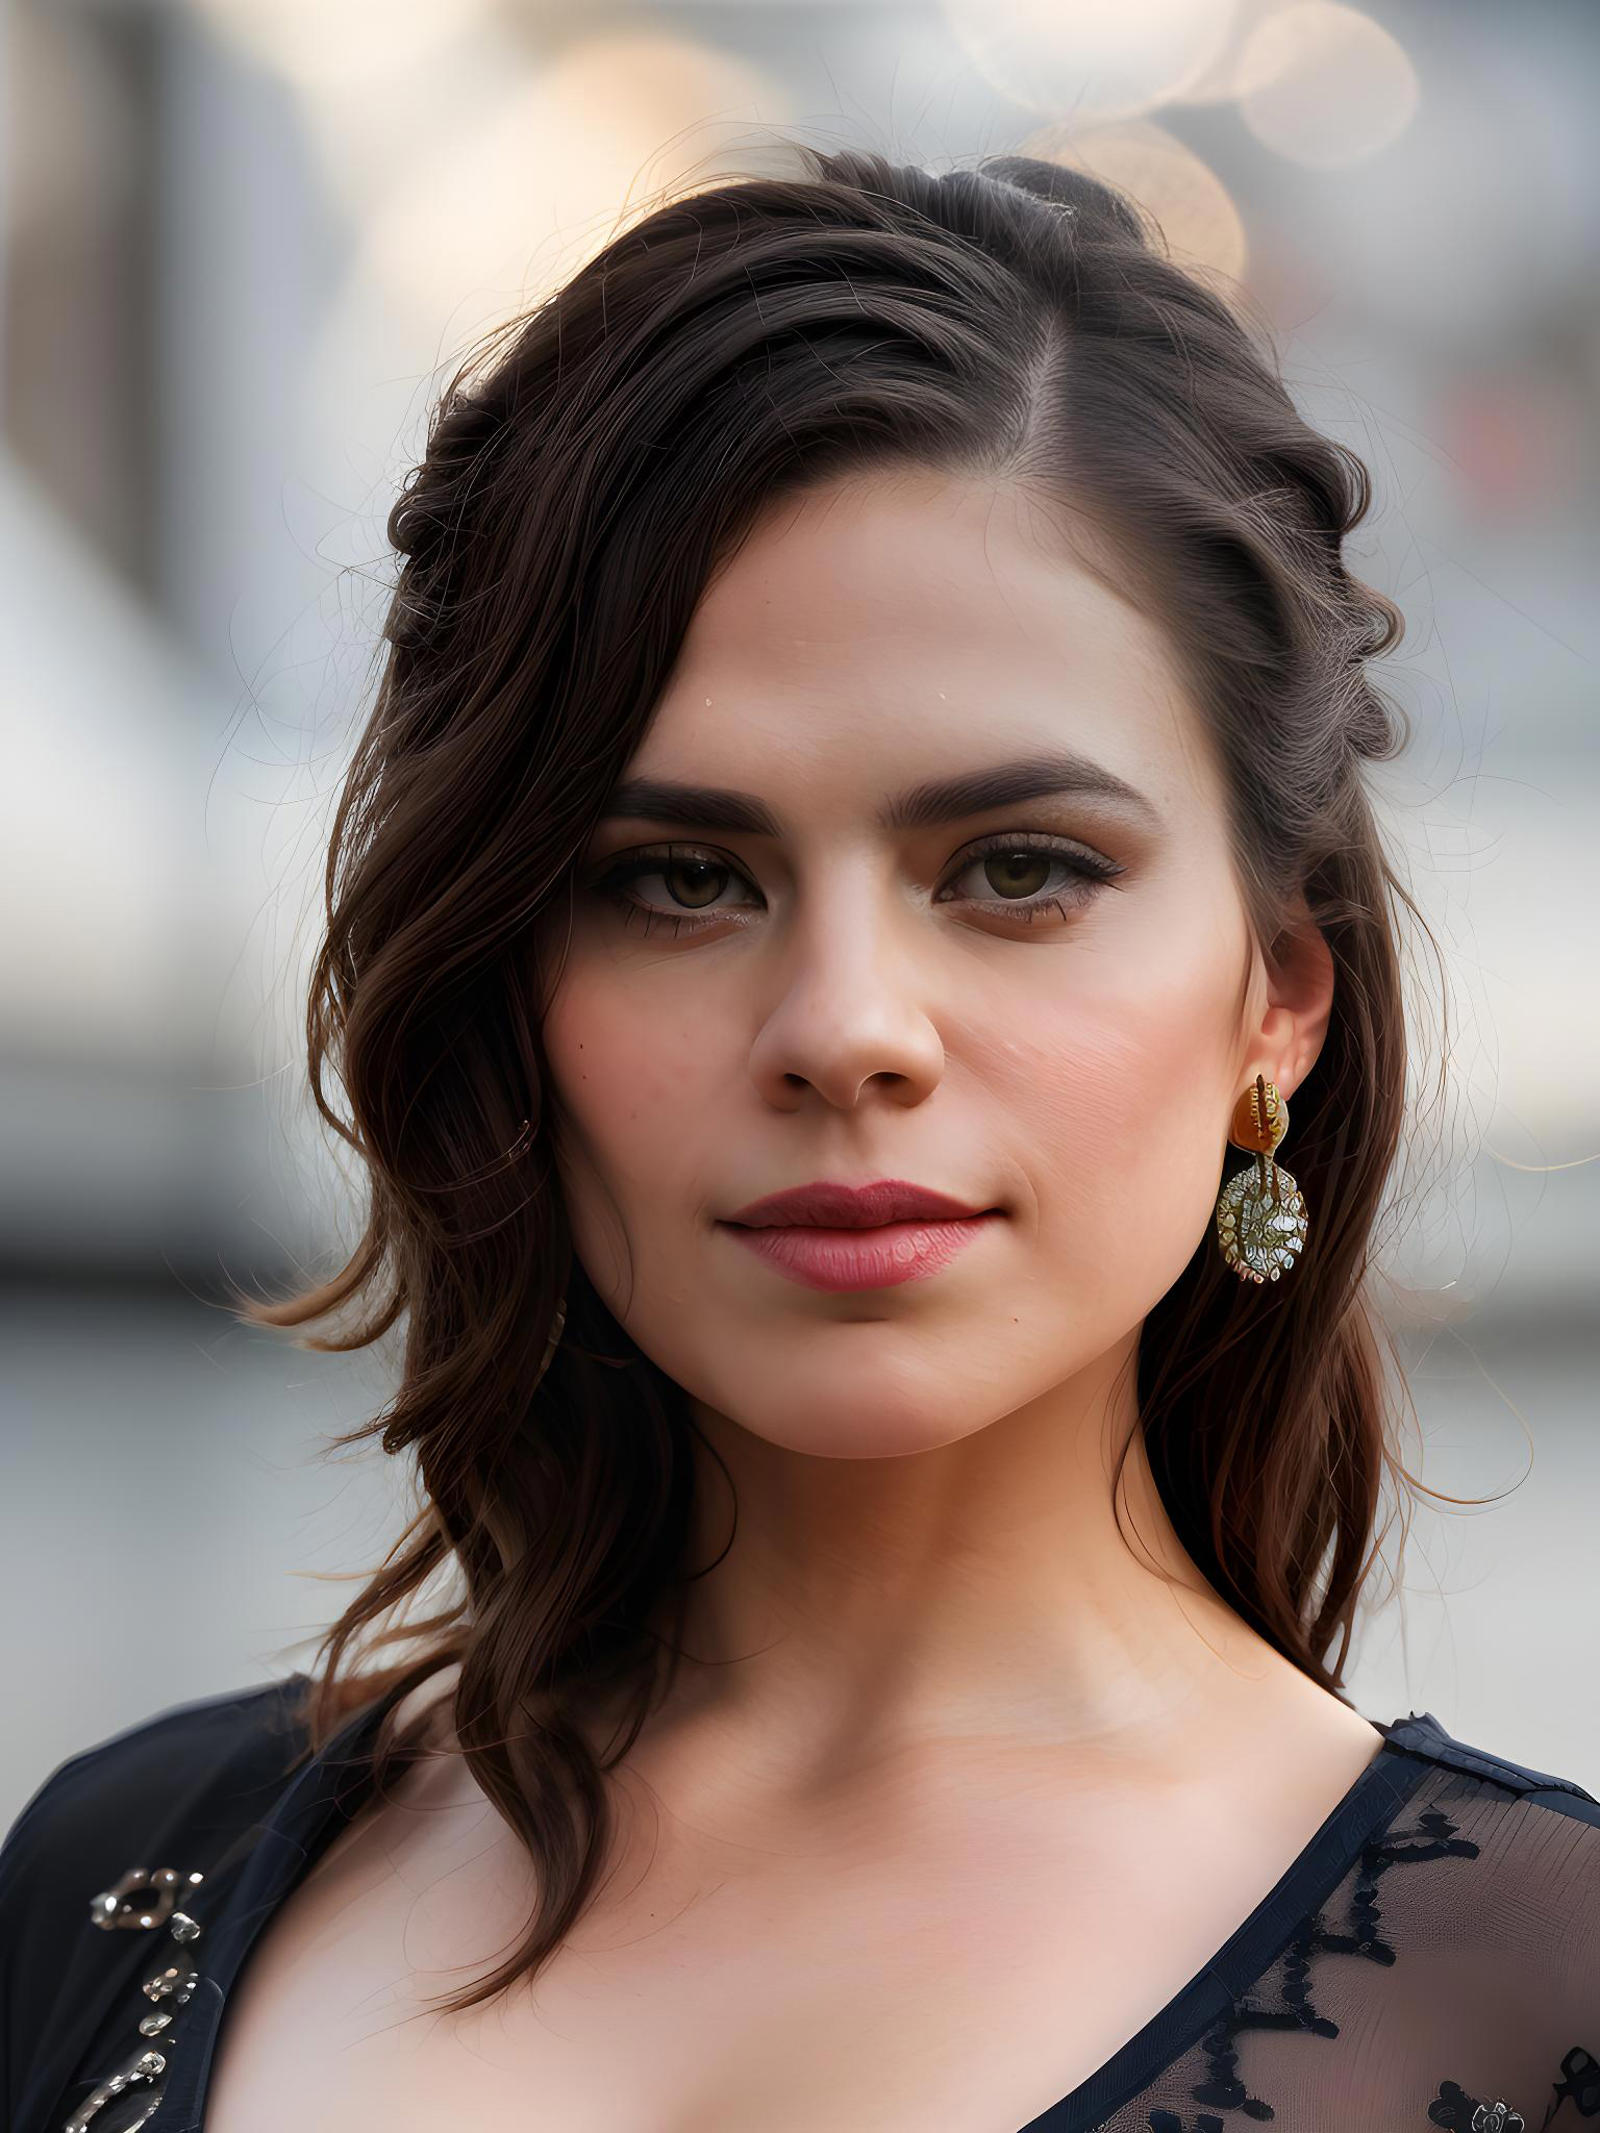 Hayley Atwell image by fraggle